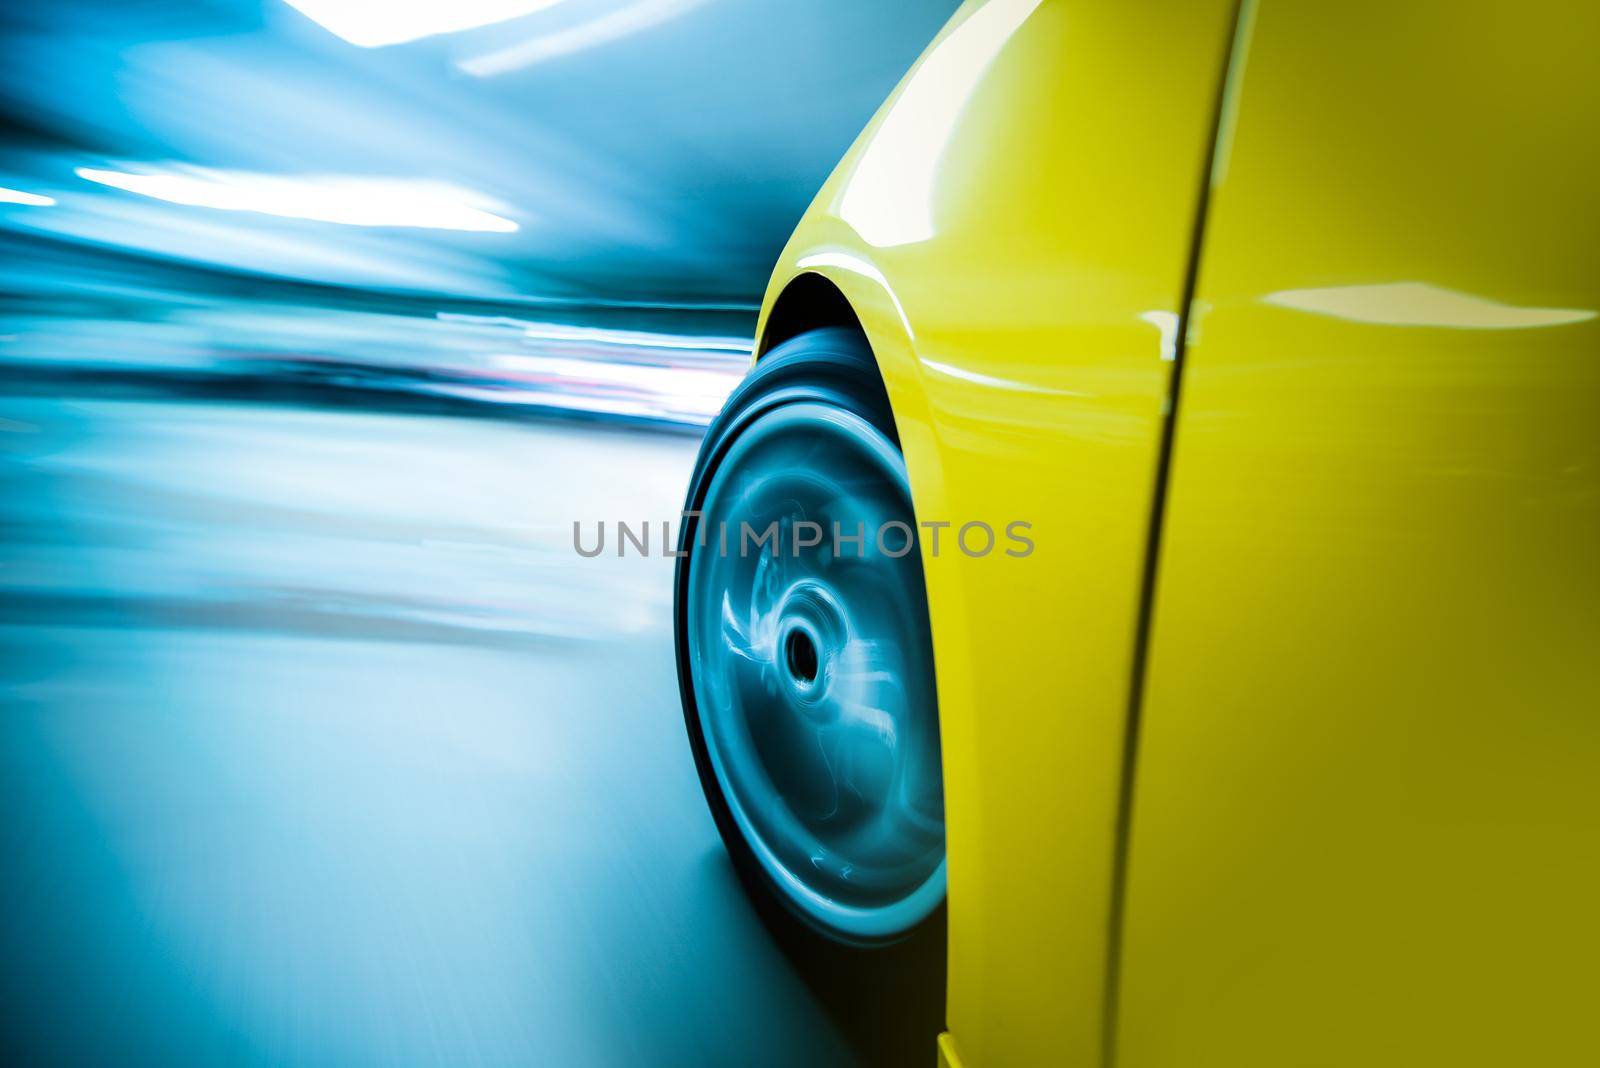 Speeding Car at Night. Long Exposure City Drive. Front Wheel in Motion Closeup. Motion Blur Transportation Concept by welcomia